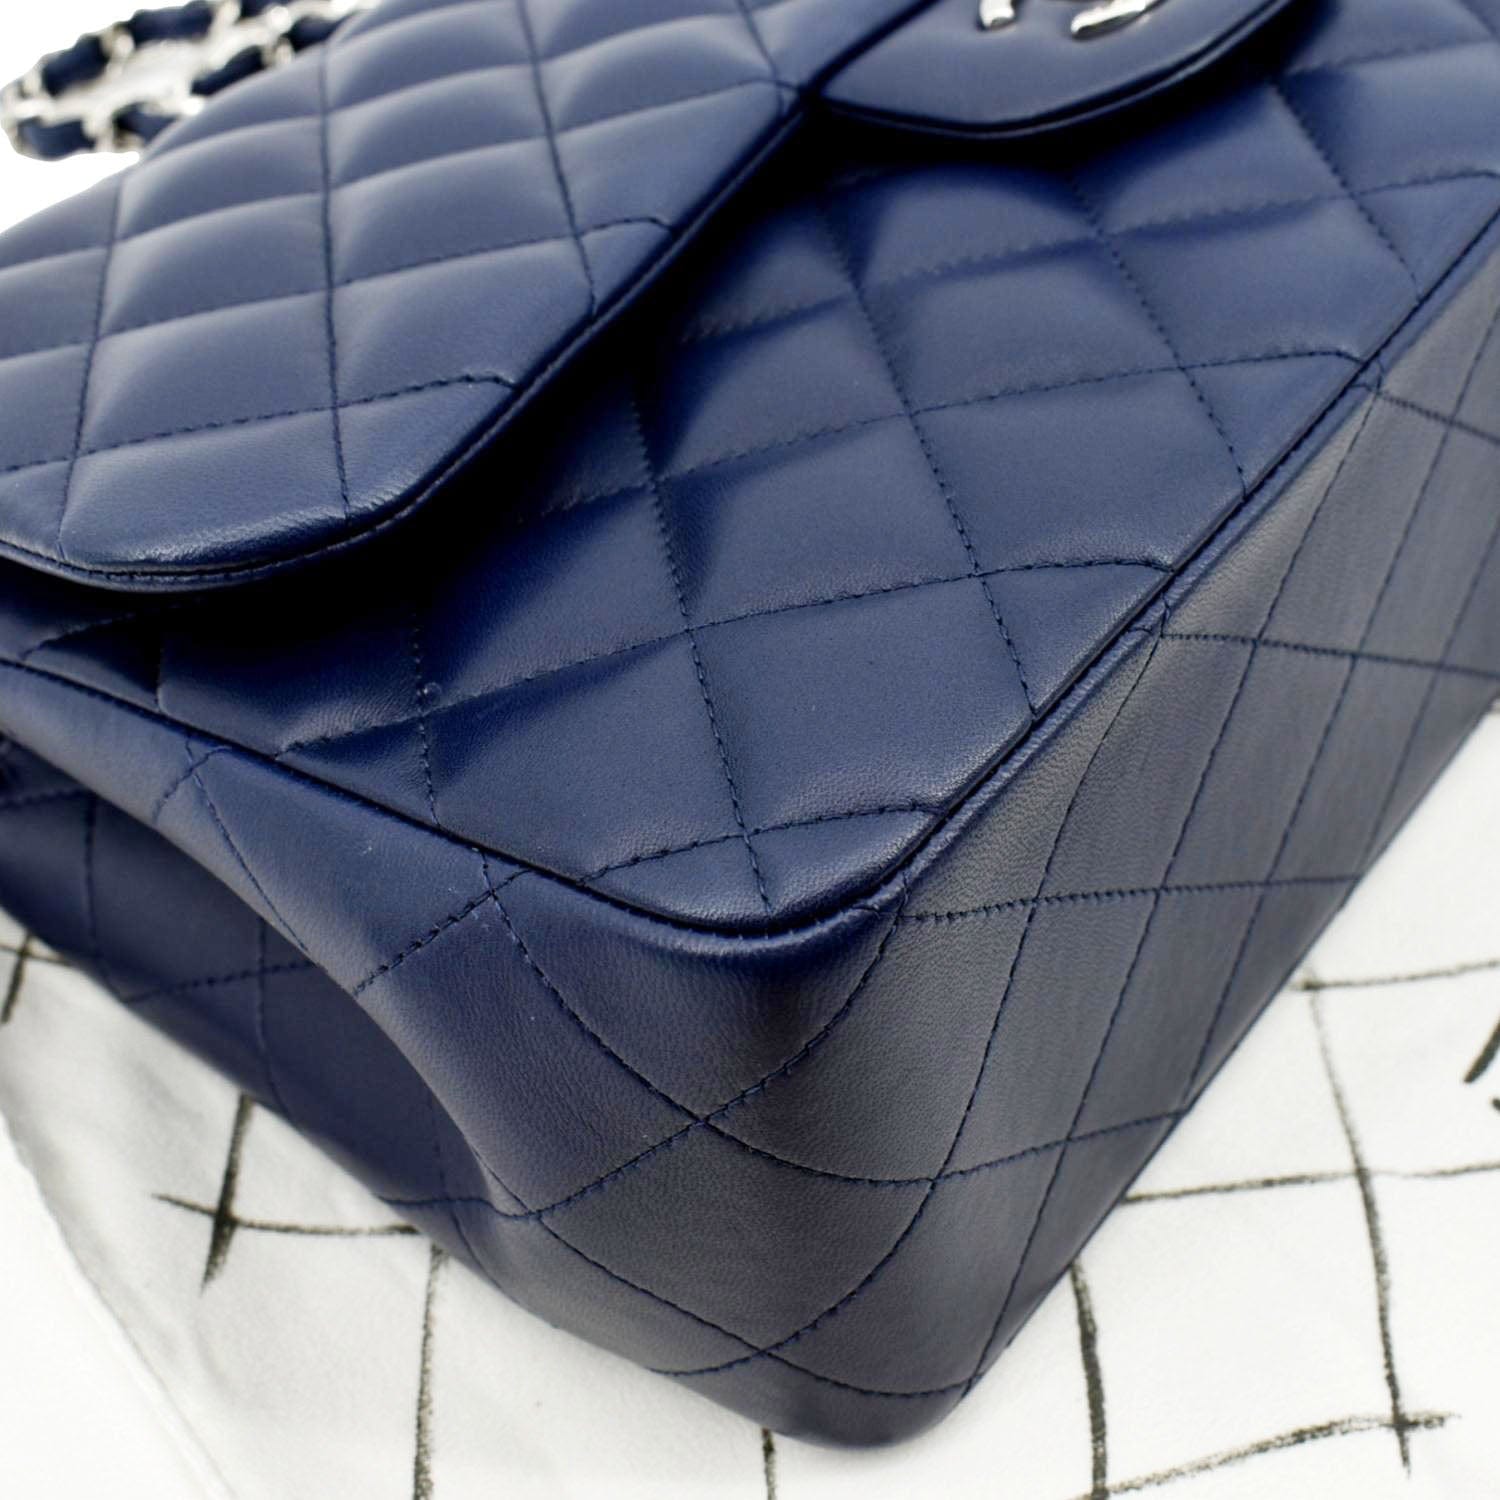 $7500 Chanel Classic Navy Blue Caviar Quilted Leather Jumbo Flap Bag Purse  SHW - Lust4Labels